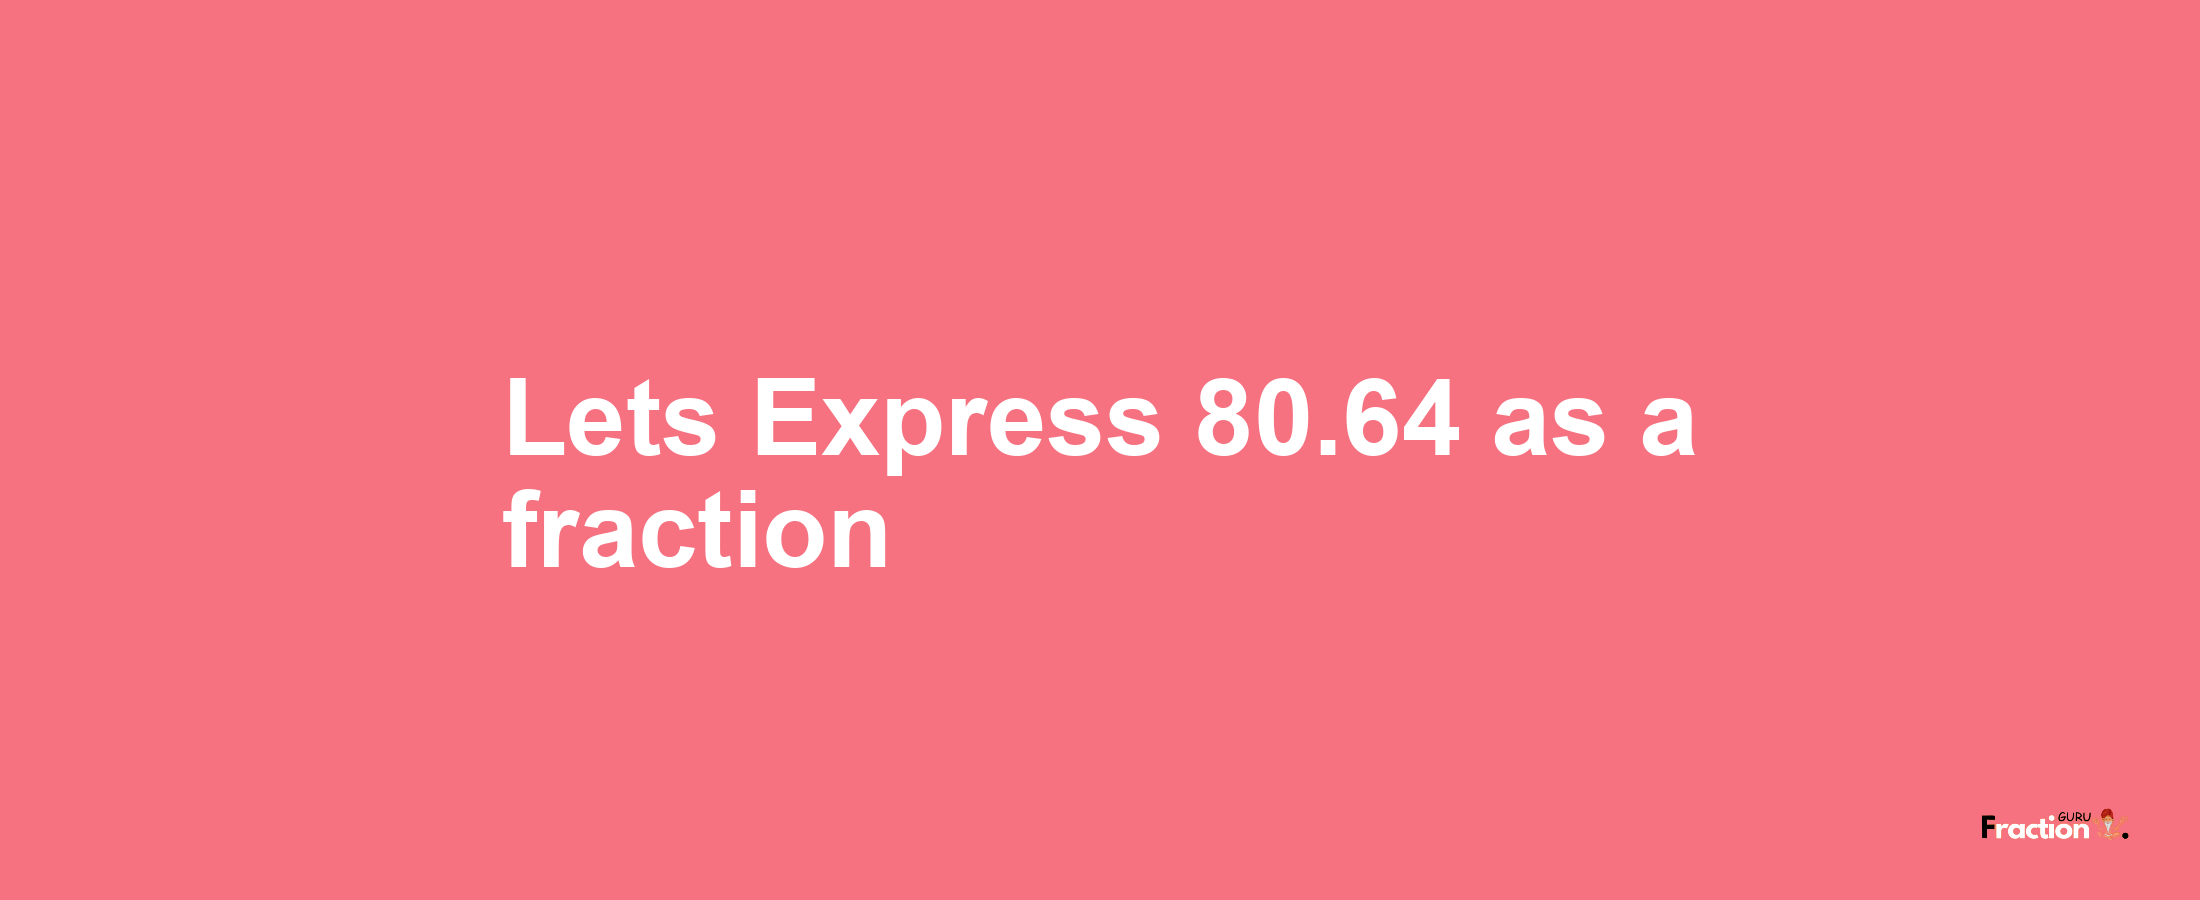 Lets Express 80.64 as afraction